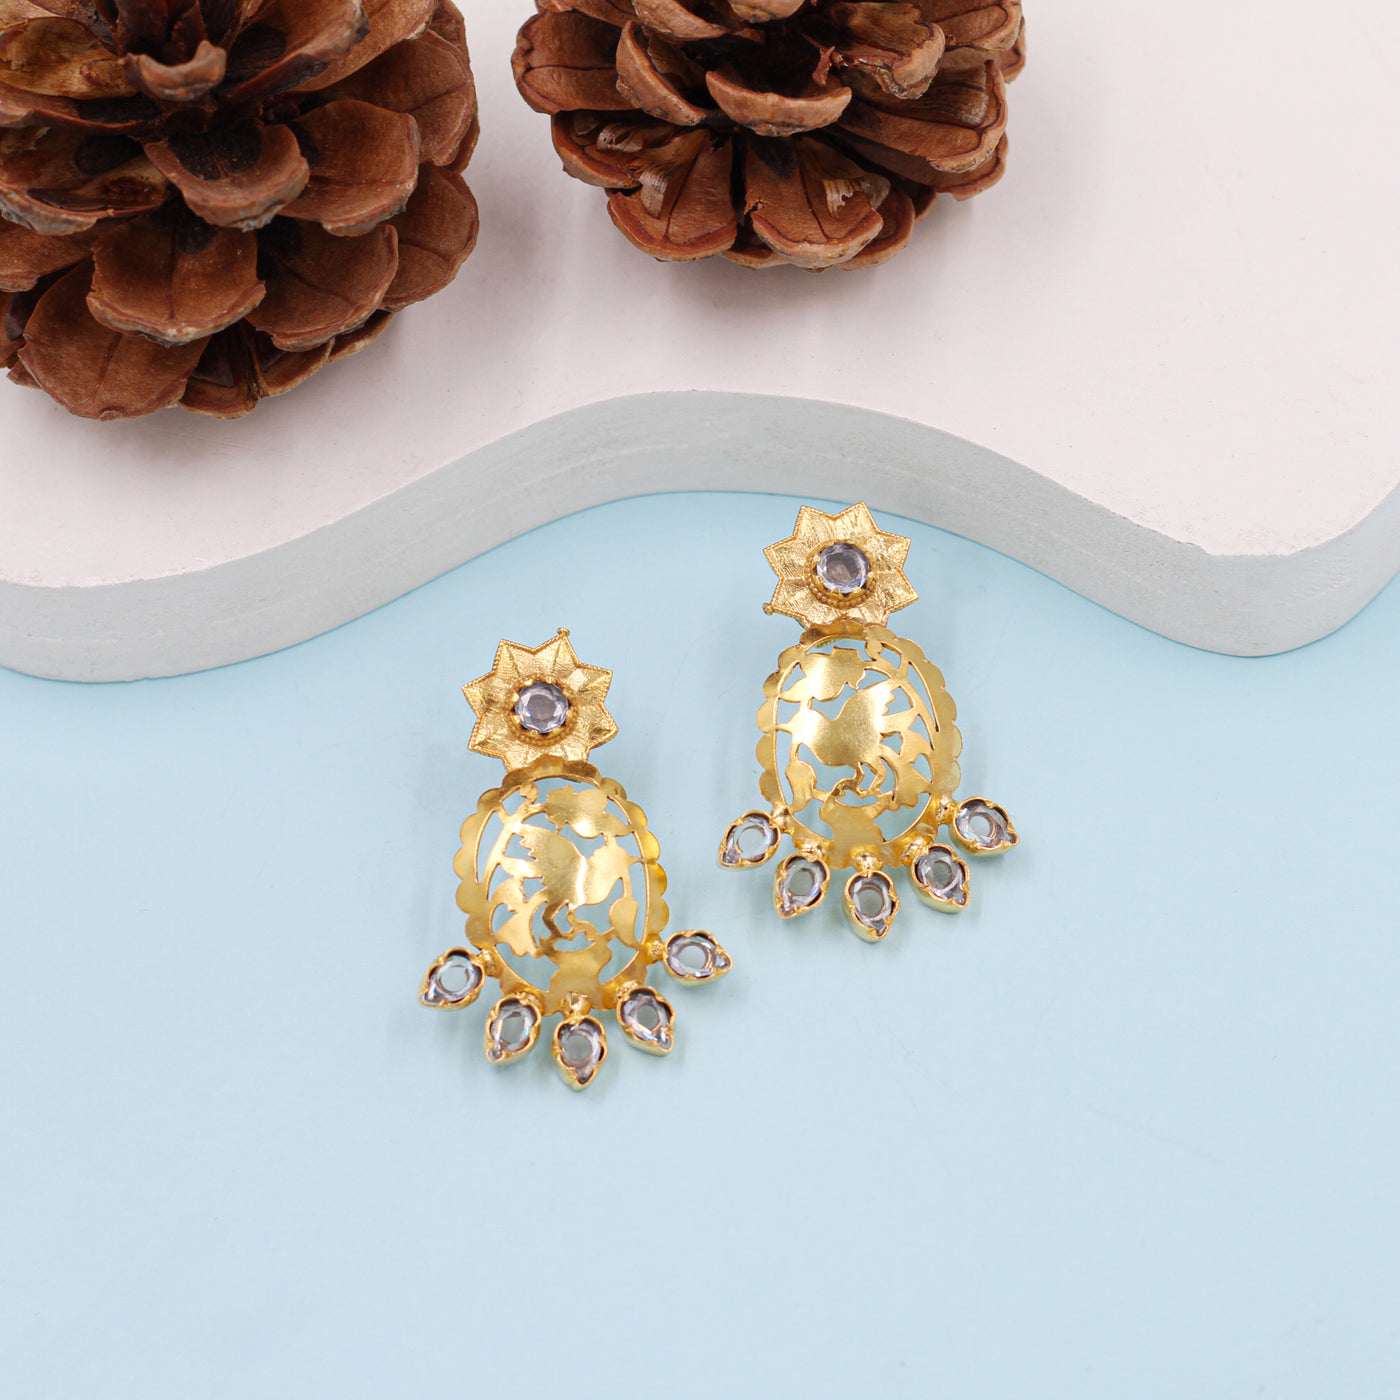 Handmade Silver Earrings Embellished with Gold Plating